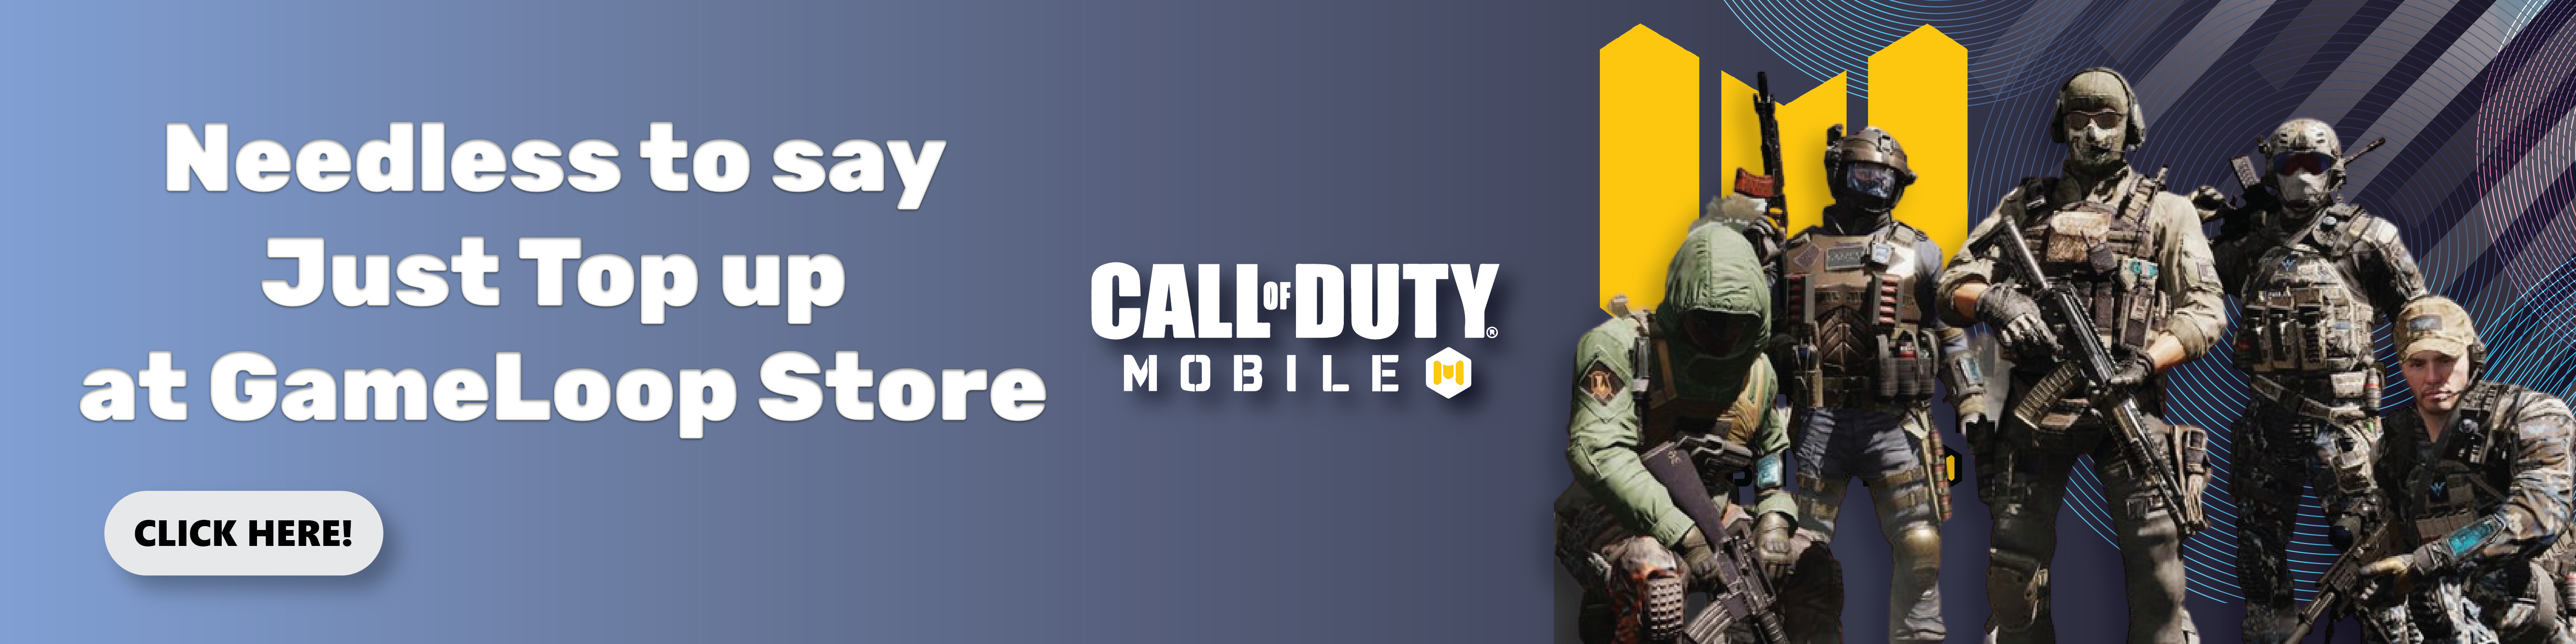 How To Download Call of Duty Mobile Garena